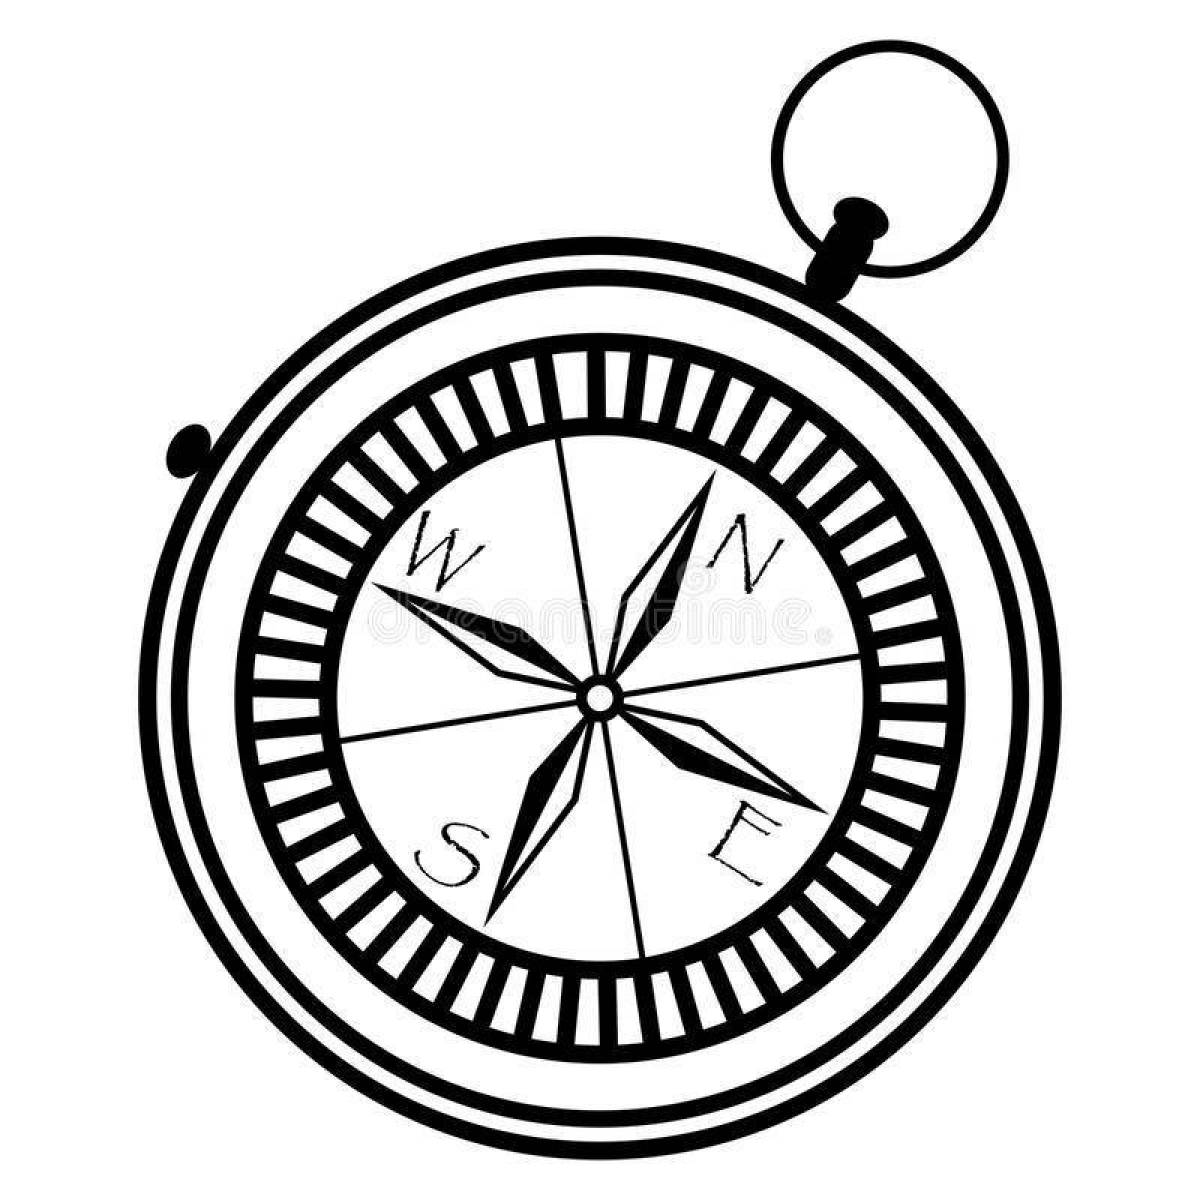 Fascinating compass coloring page